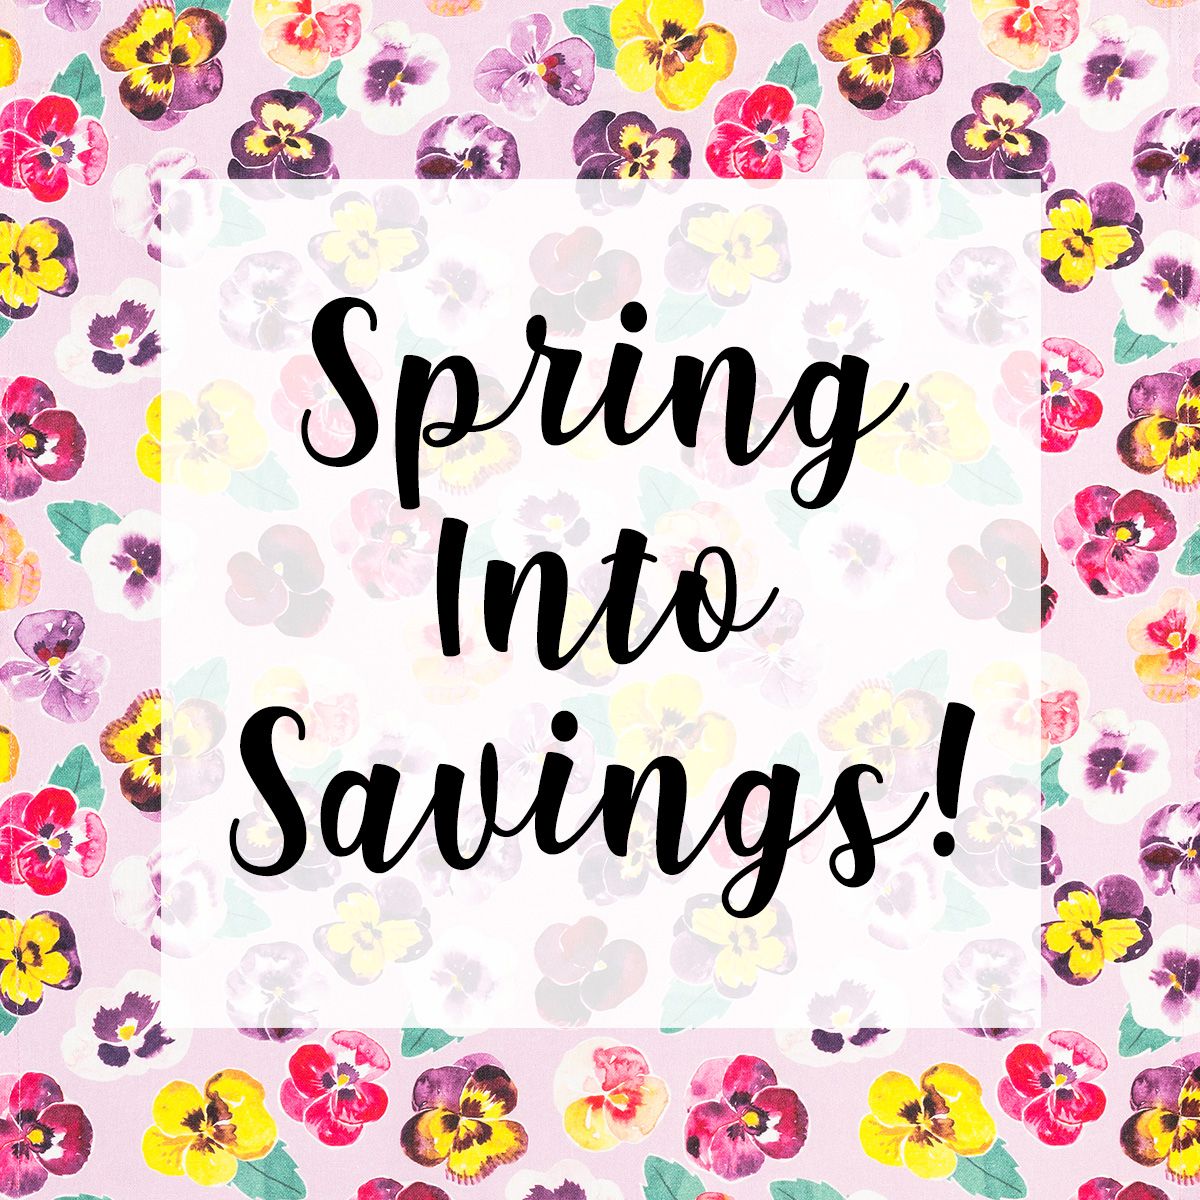 Spring Into Savings promo ends April 30! Receive discounts or dating on orders of in-stock merchandise. 💐🌼🌸🌷